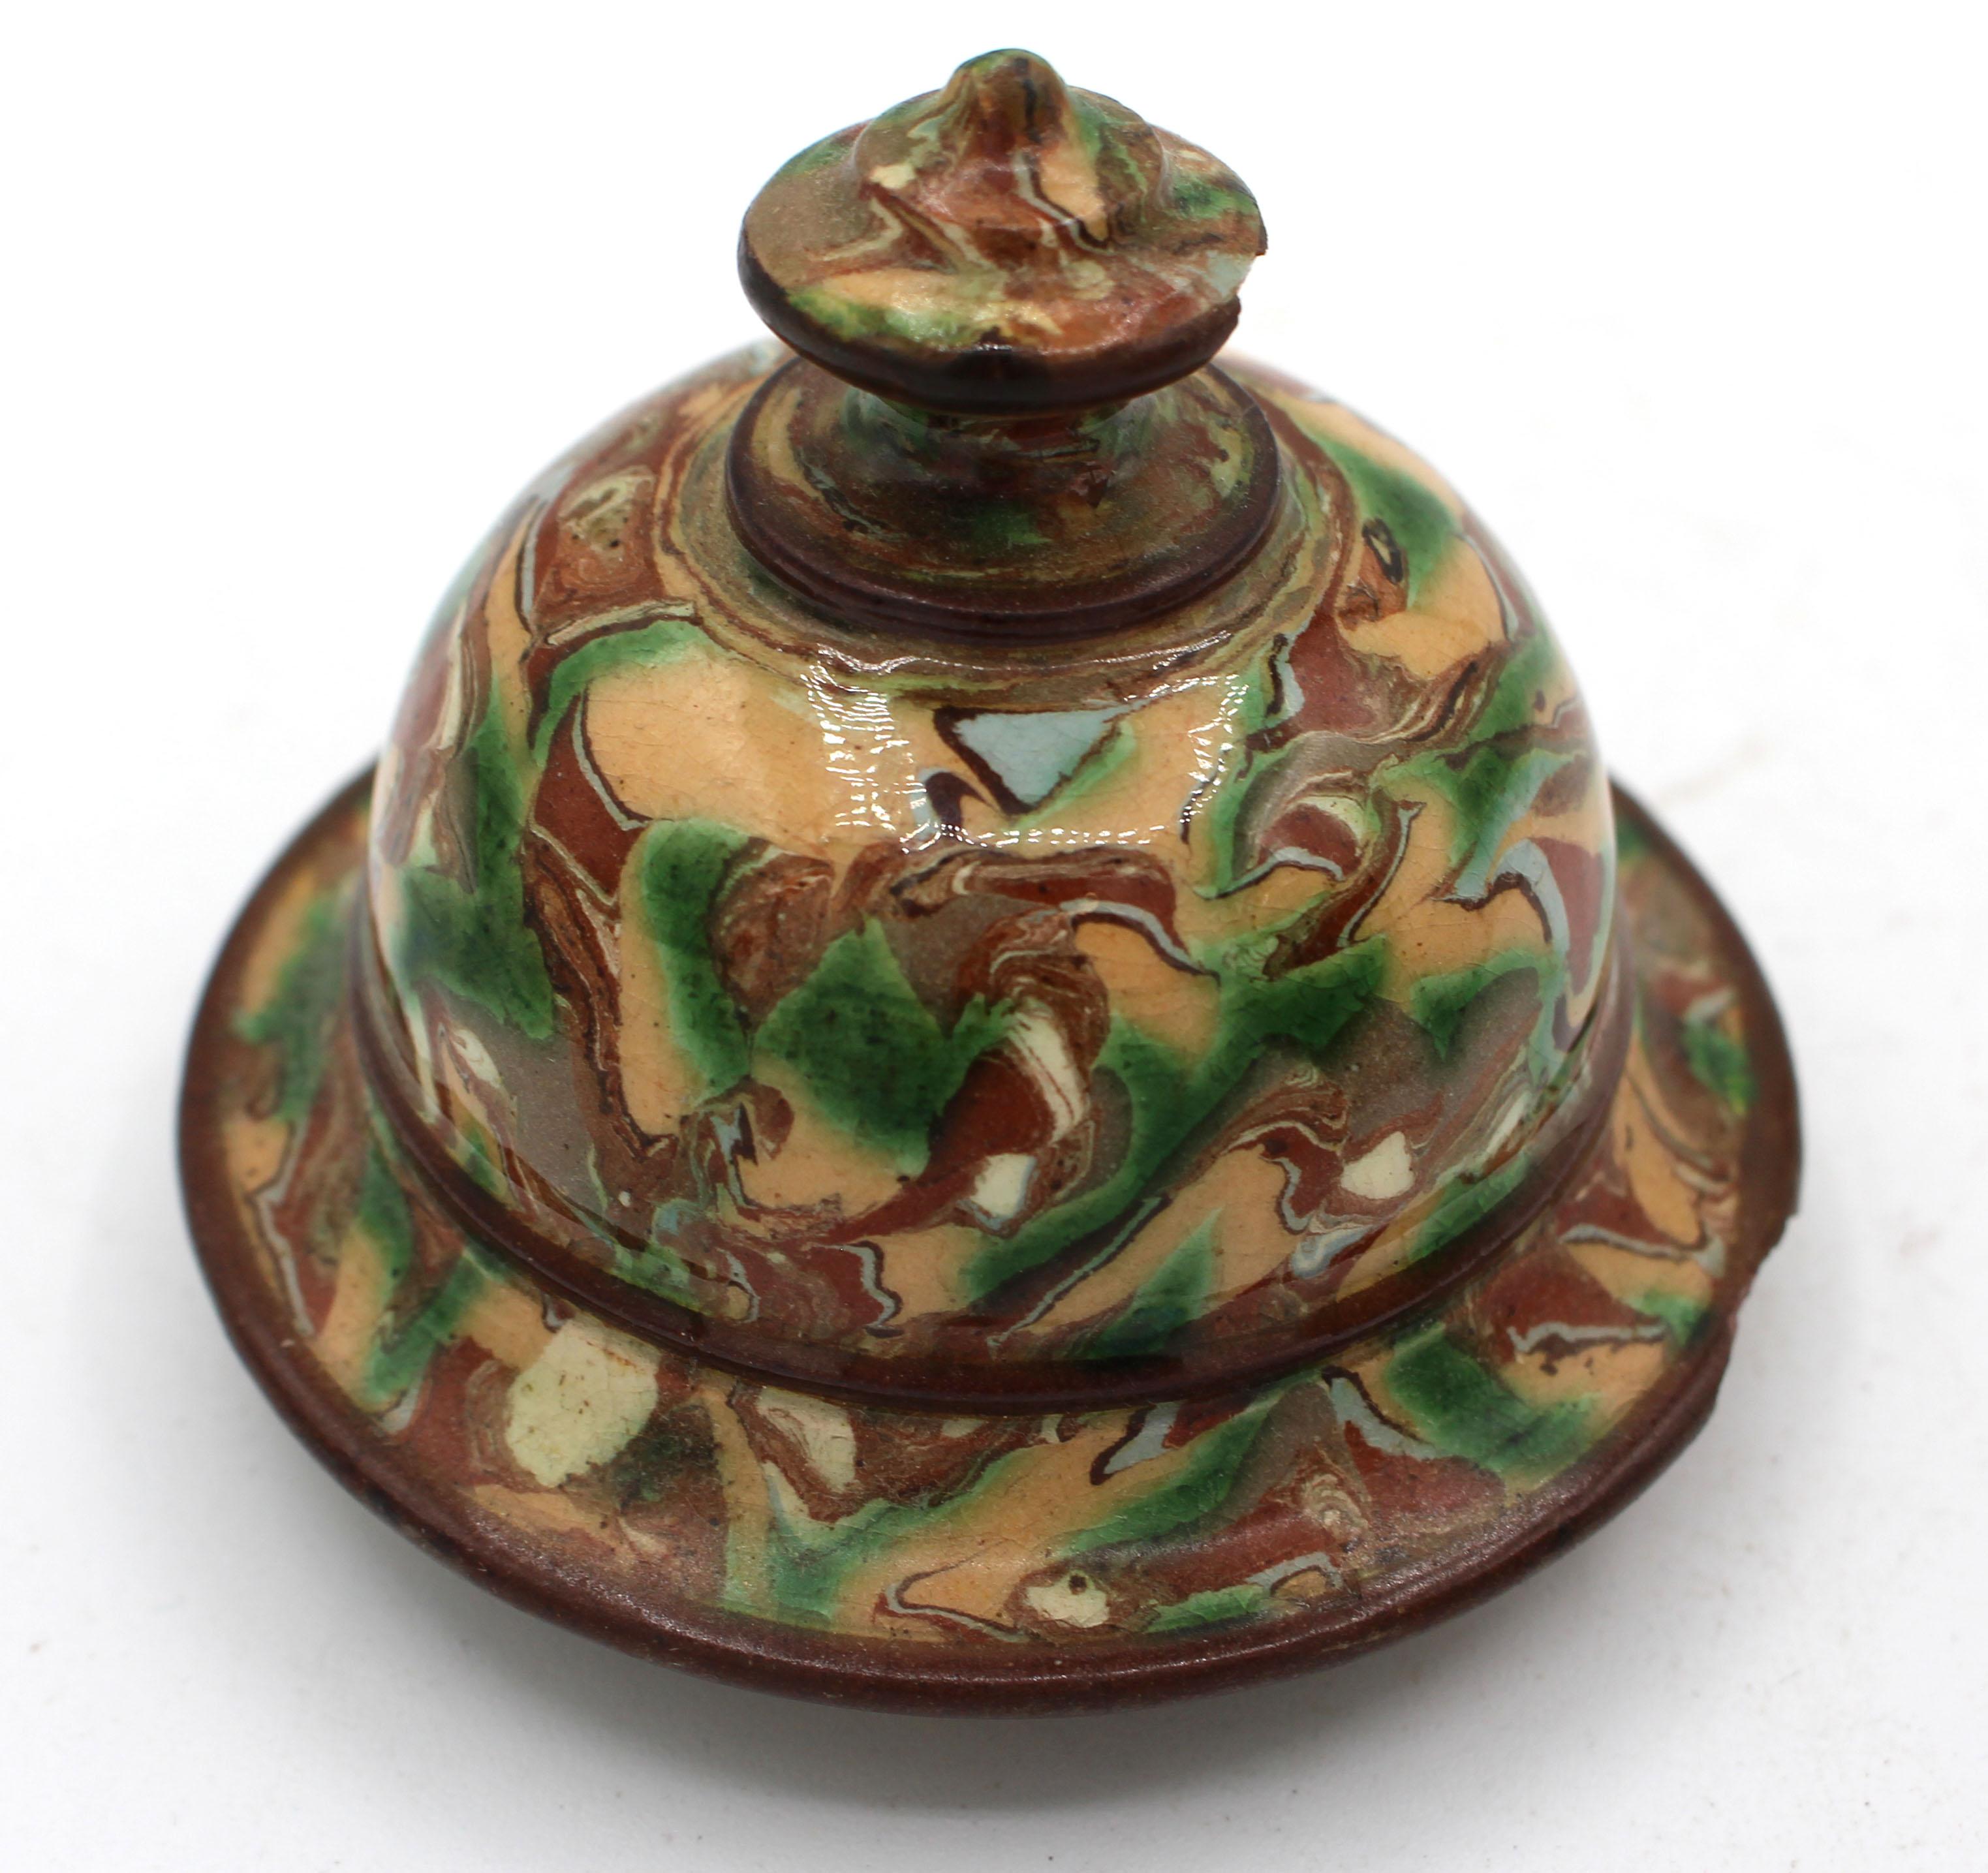 Circa 1900 Terracotta Covered Jar, French, by Maison Pichon Uzes For Sale 2